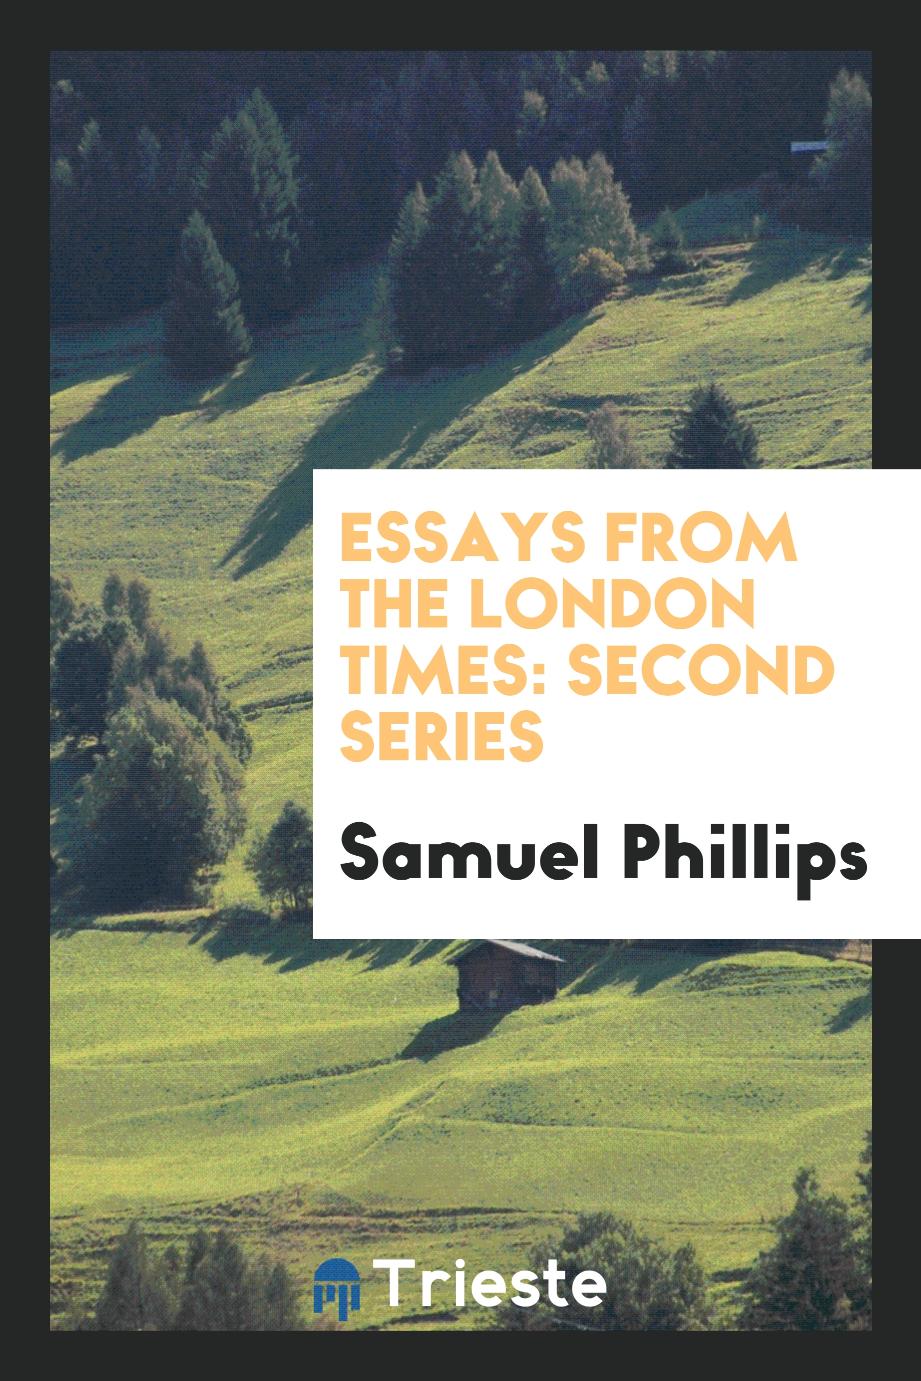 Samuel Phillips - Essays from the London Times: Second Series